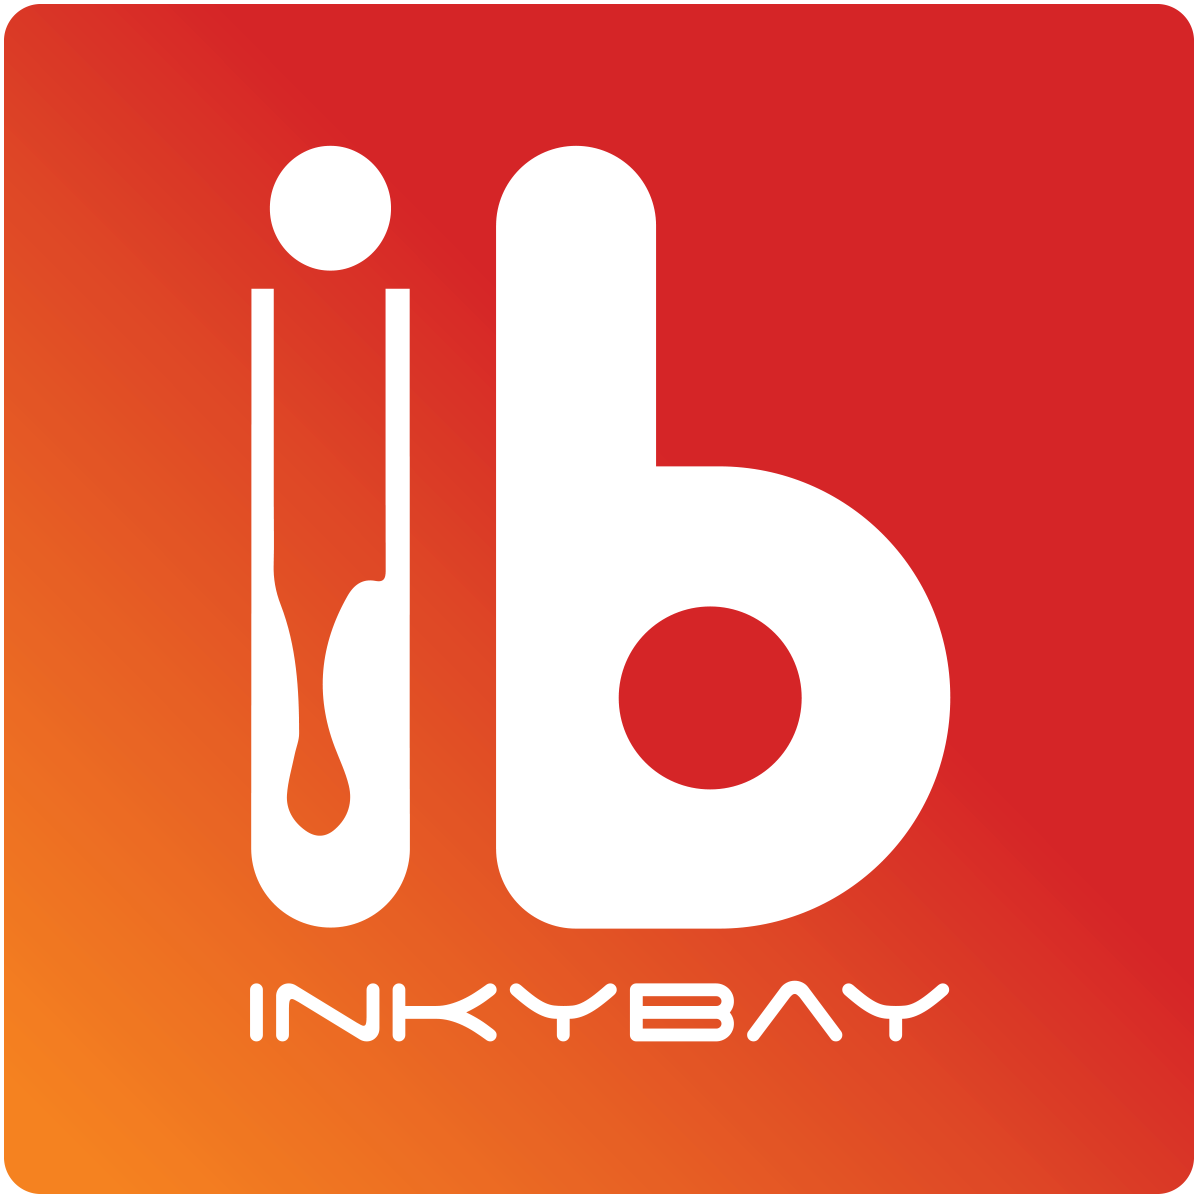 Hire Shopify Experts to integrate Inkybay â€‘ Product Customizer app into a Shopify store